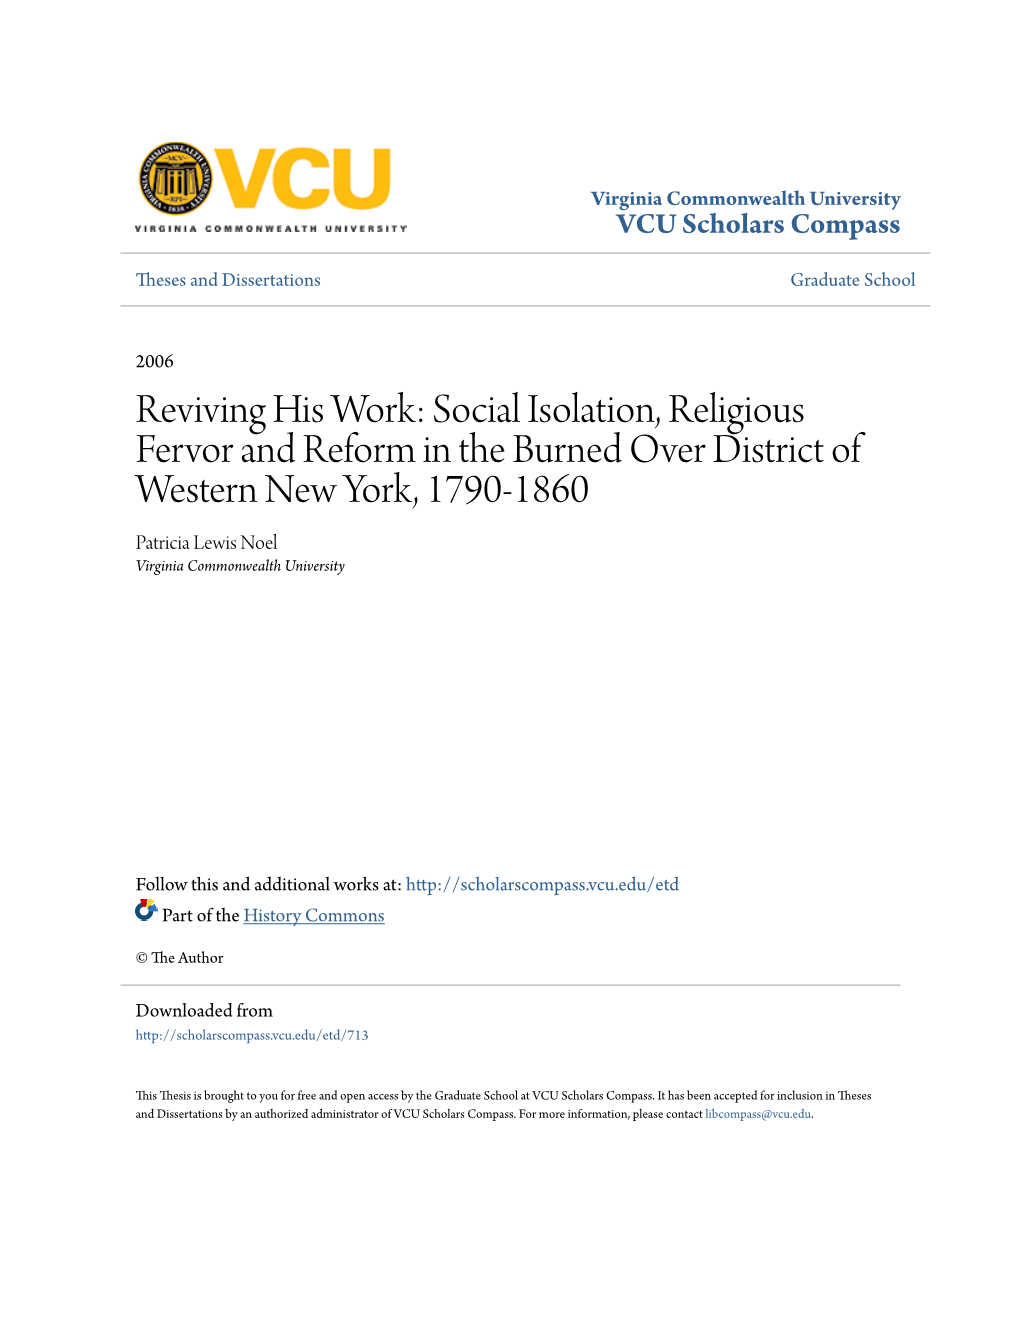 Social Isolation, Religious Fervor and Reform in the Burned Over District of Western New York, 1790-1860 Patricia Lewis Noel Virginia Commonwealth University